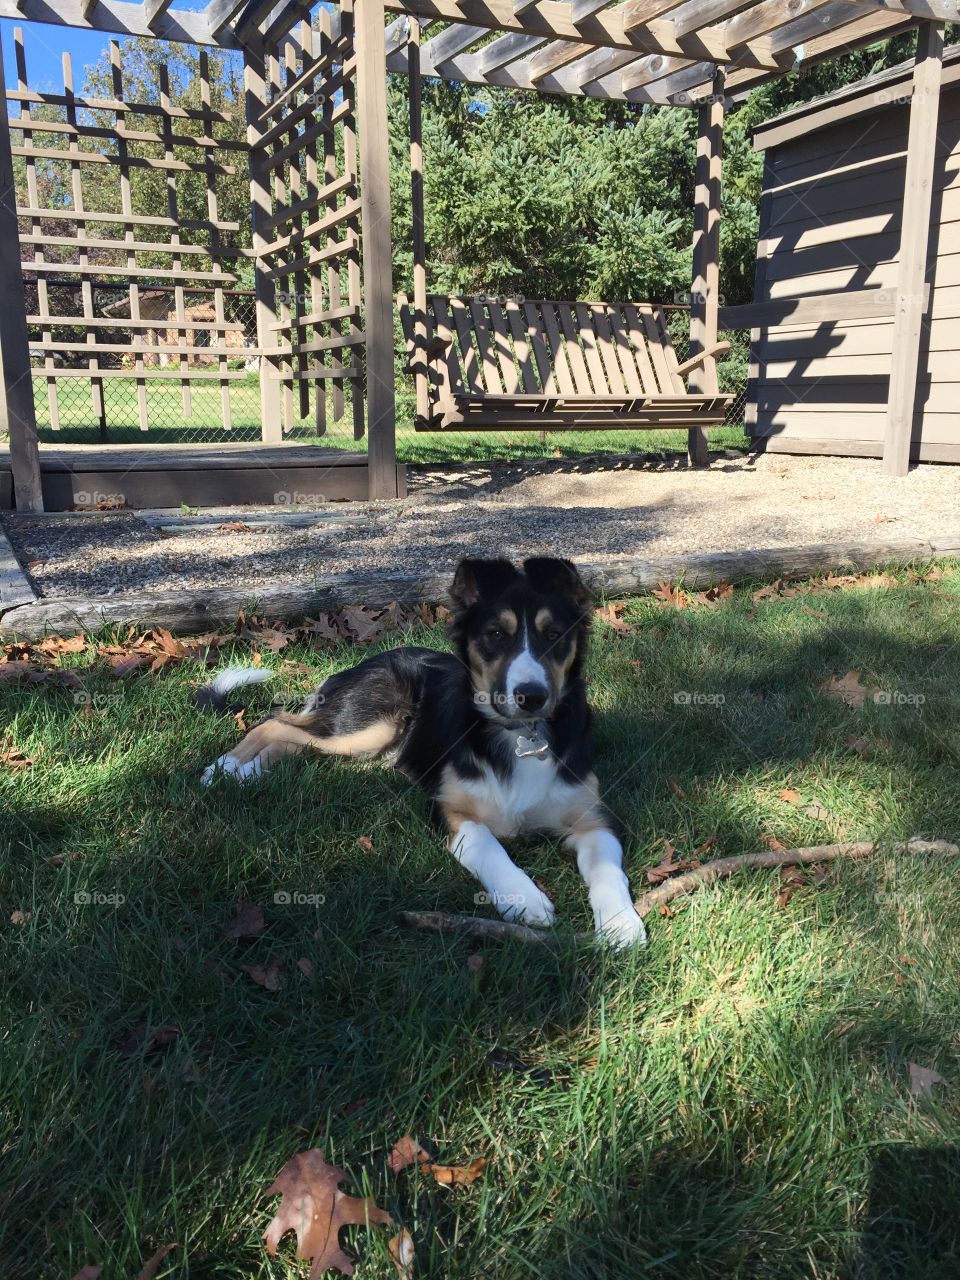 Mikey . My puppy Border Collie Mikey.  He is enjoying a beautiful Fall day. 